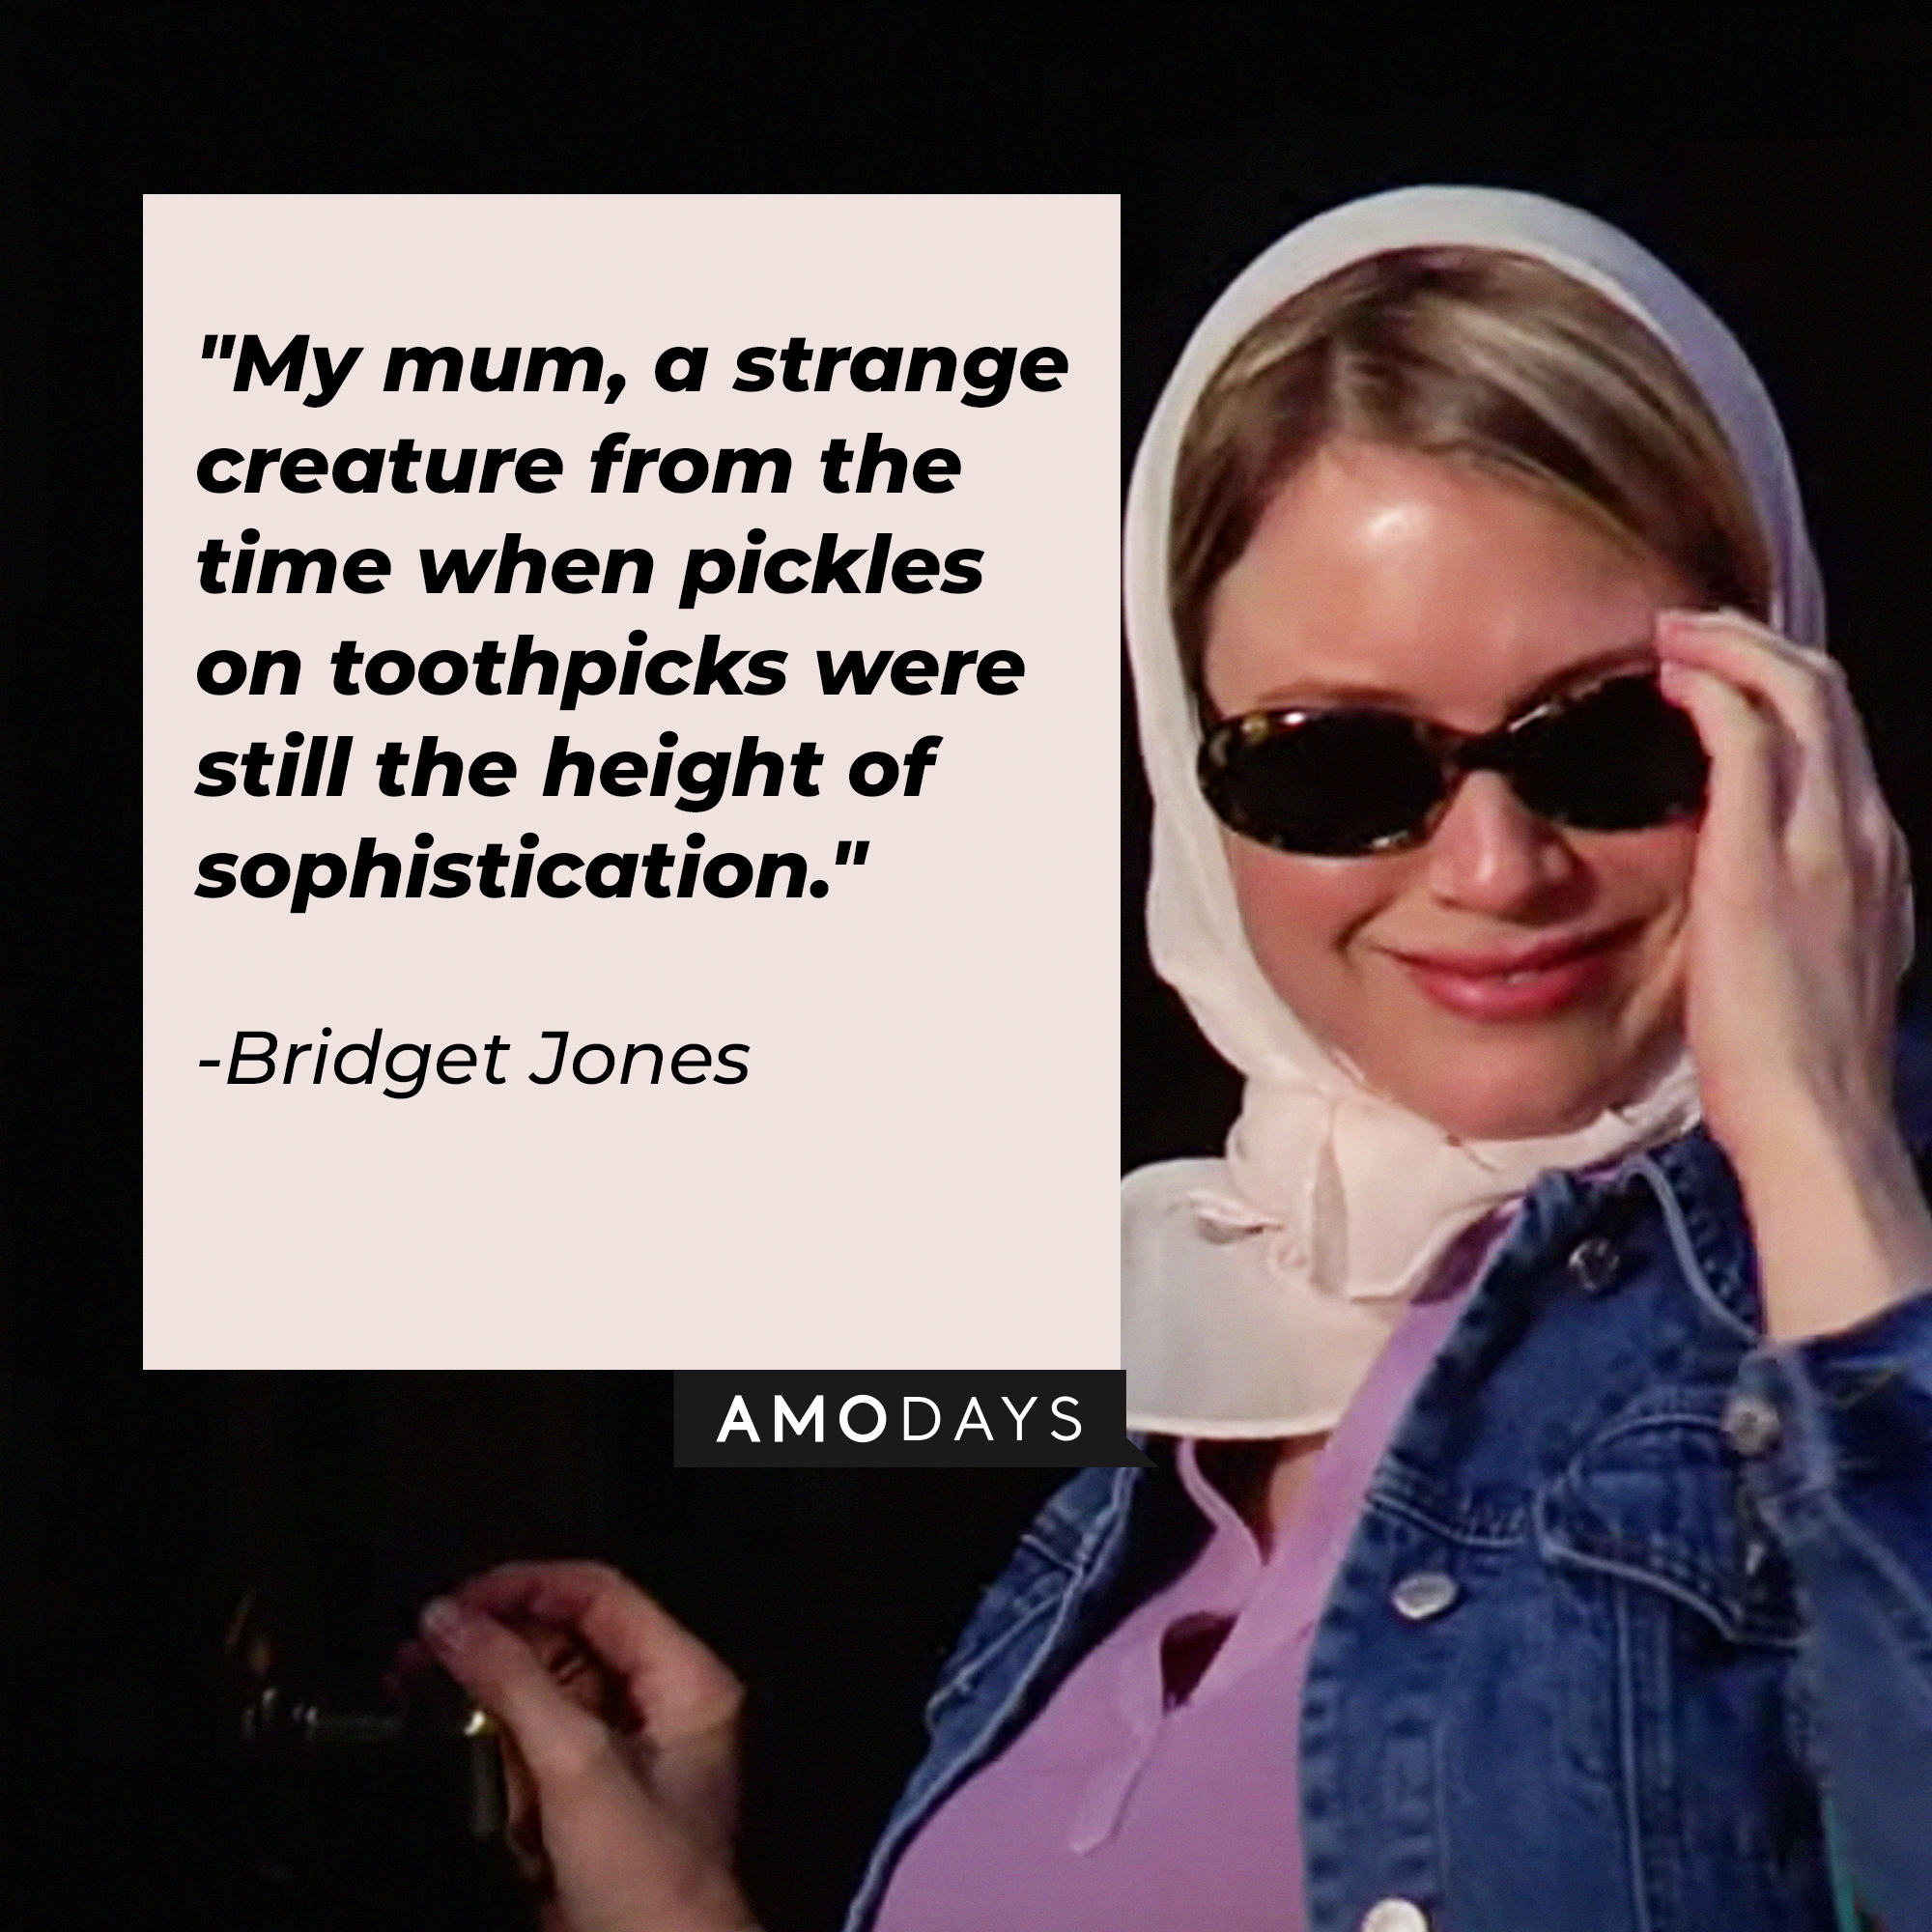 Bridget Jones with her quote in "Bridget Jones's Diary:" "My mum, a strange creature from the time when pickles on toothpicks were still the height of sophistication." | Source: Facebook/BridgetJonessDiary